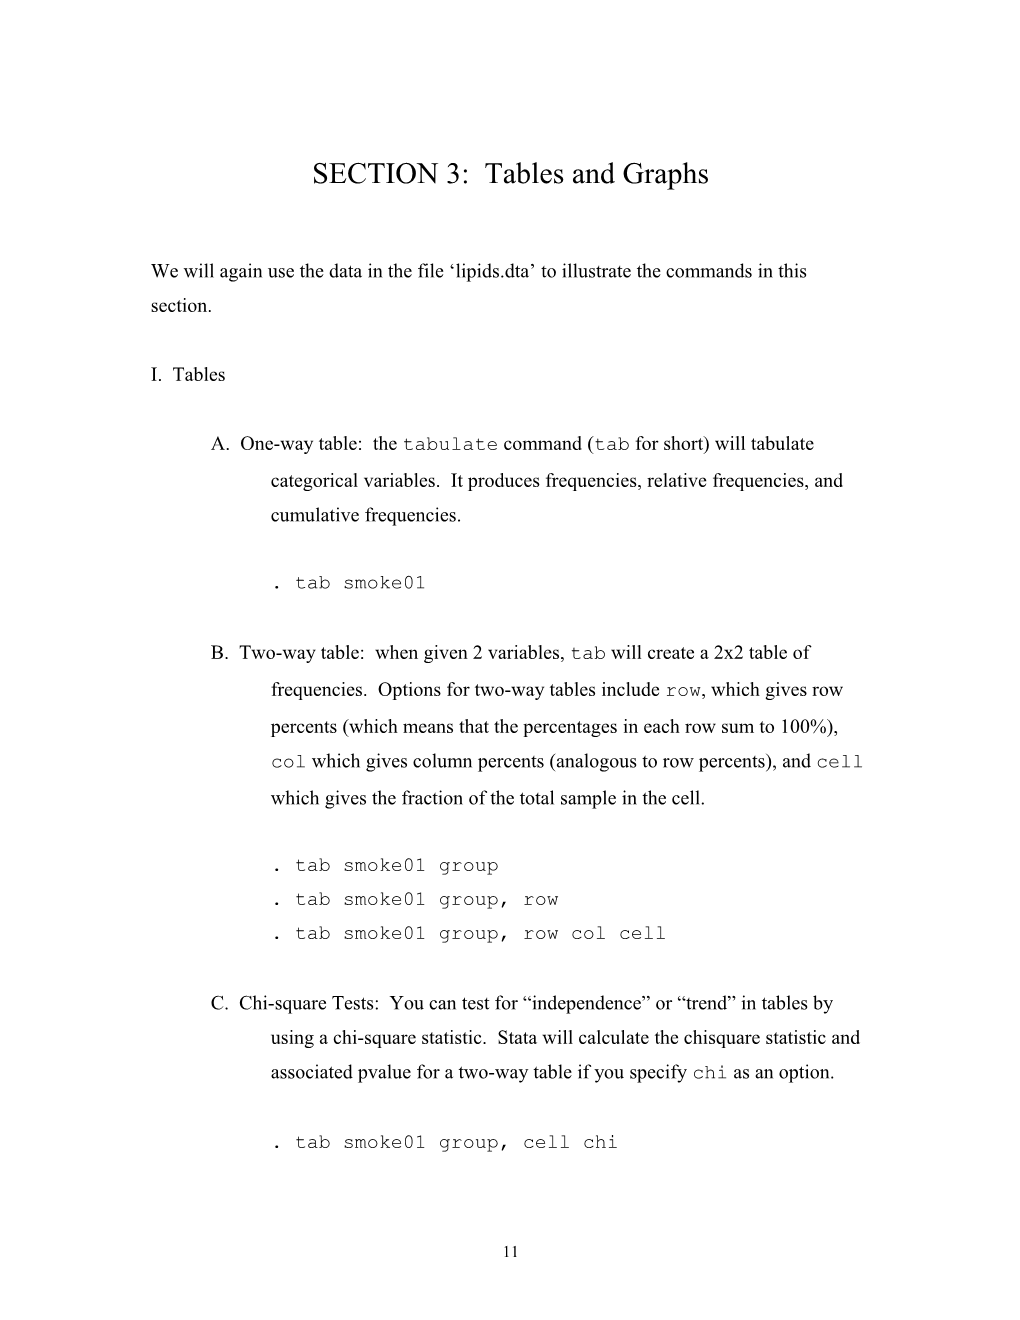 SECTION 3: Tables and Graphs